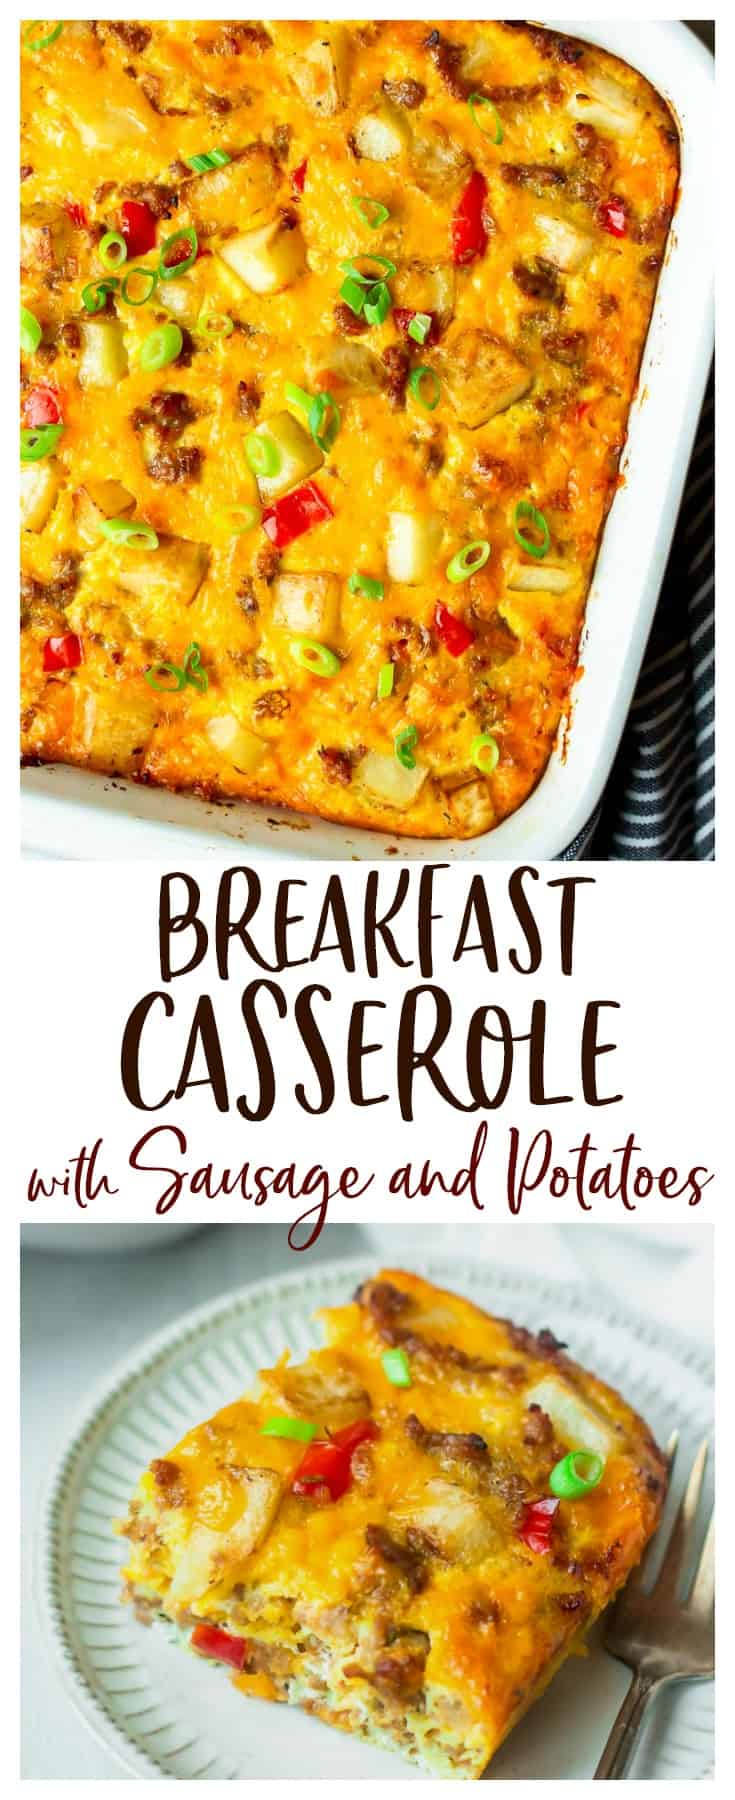 Easy Breakfast Casserole Recipe with Sausage and Potatoes